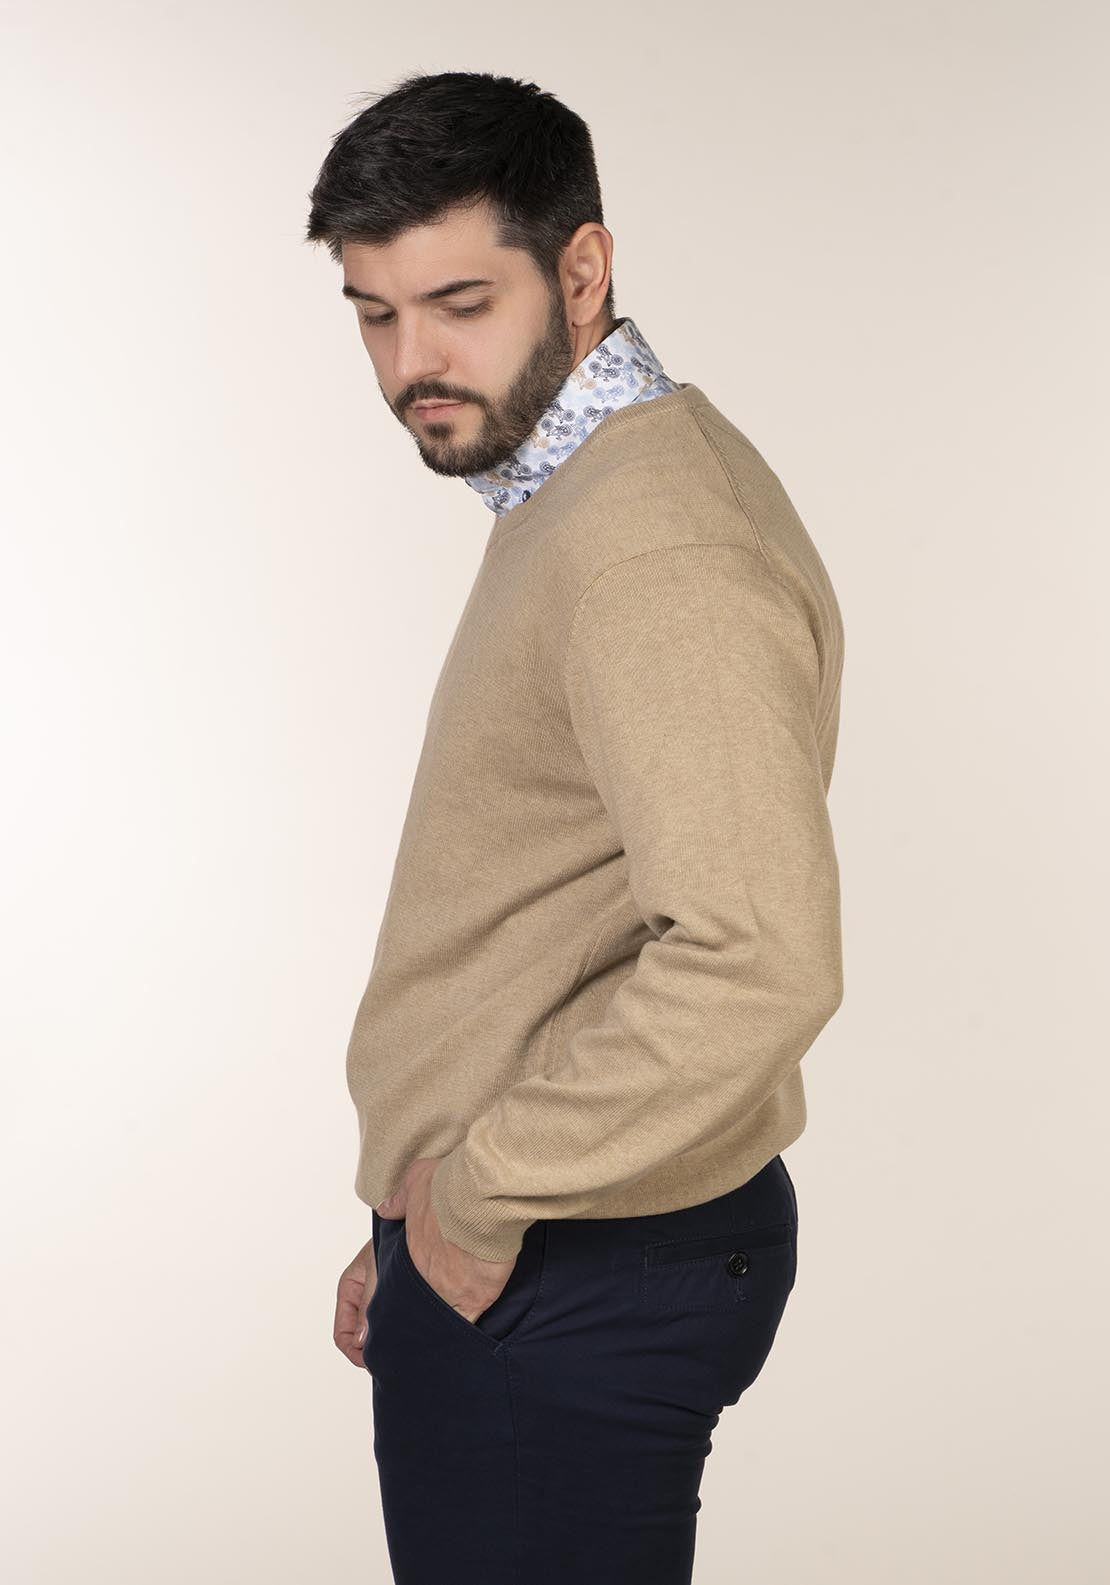 Yeats Plain Cotton V Neck Sweaters - Beige 6 Shaws Department Stores